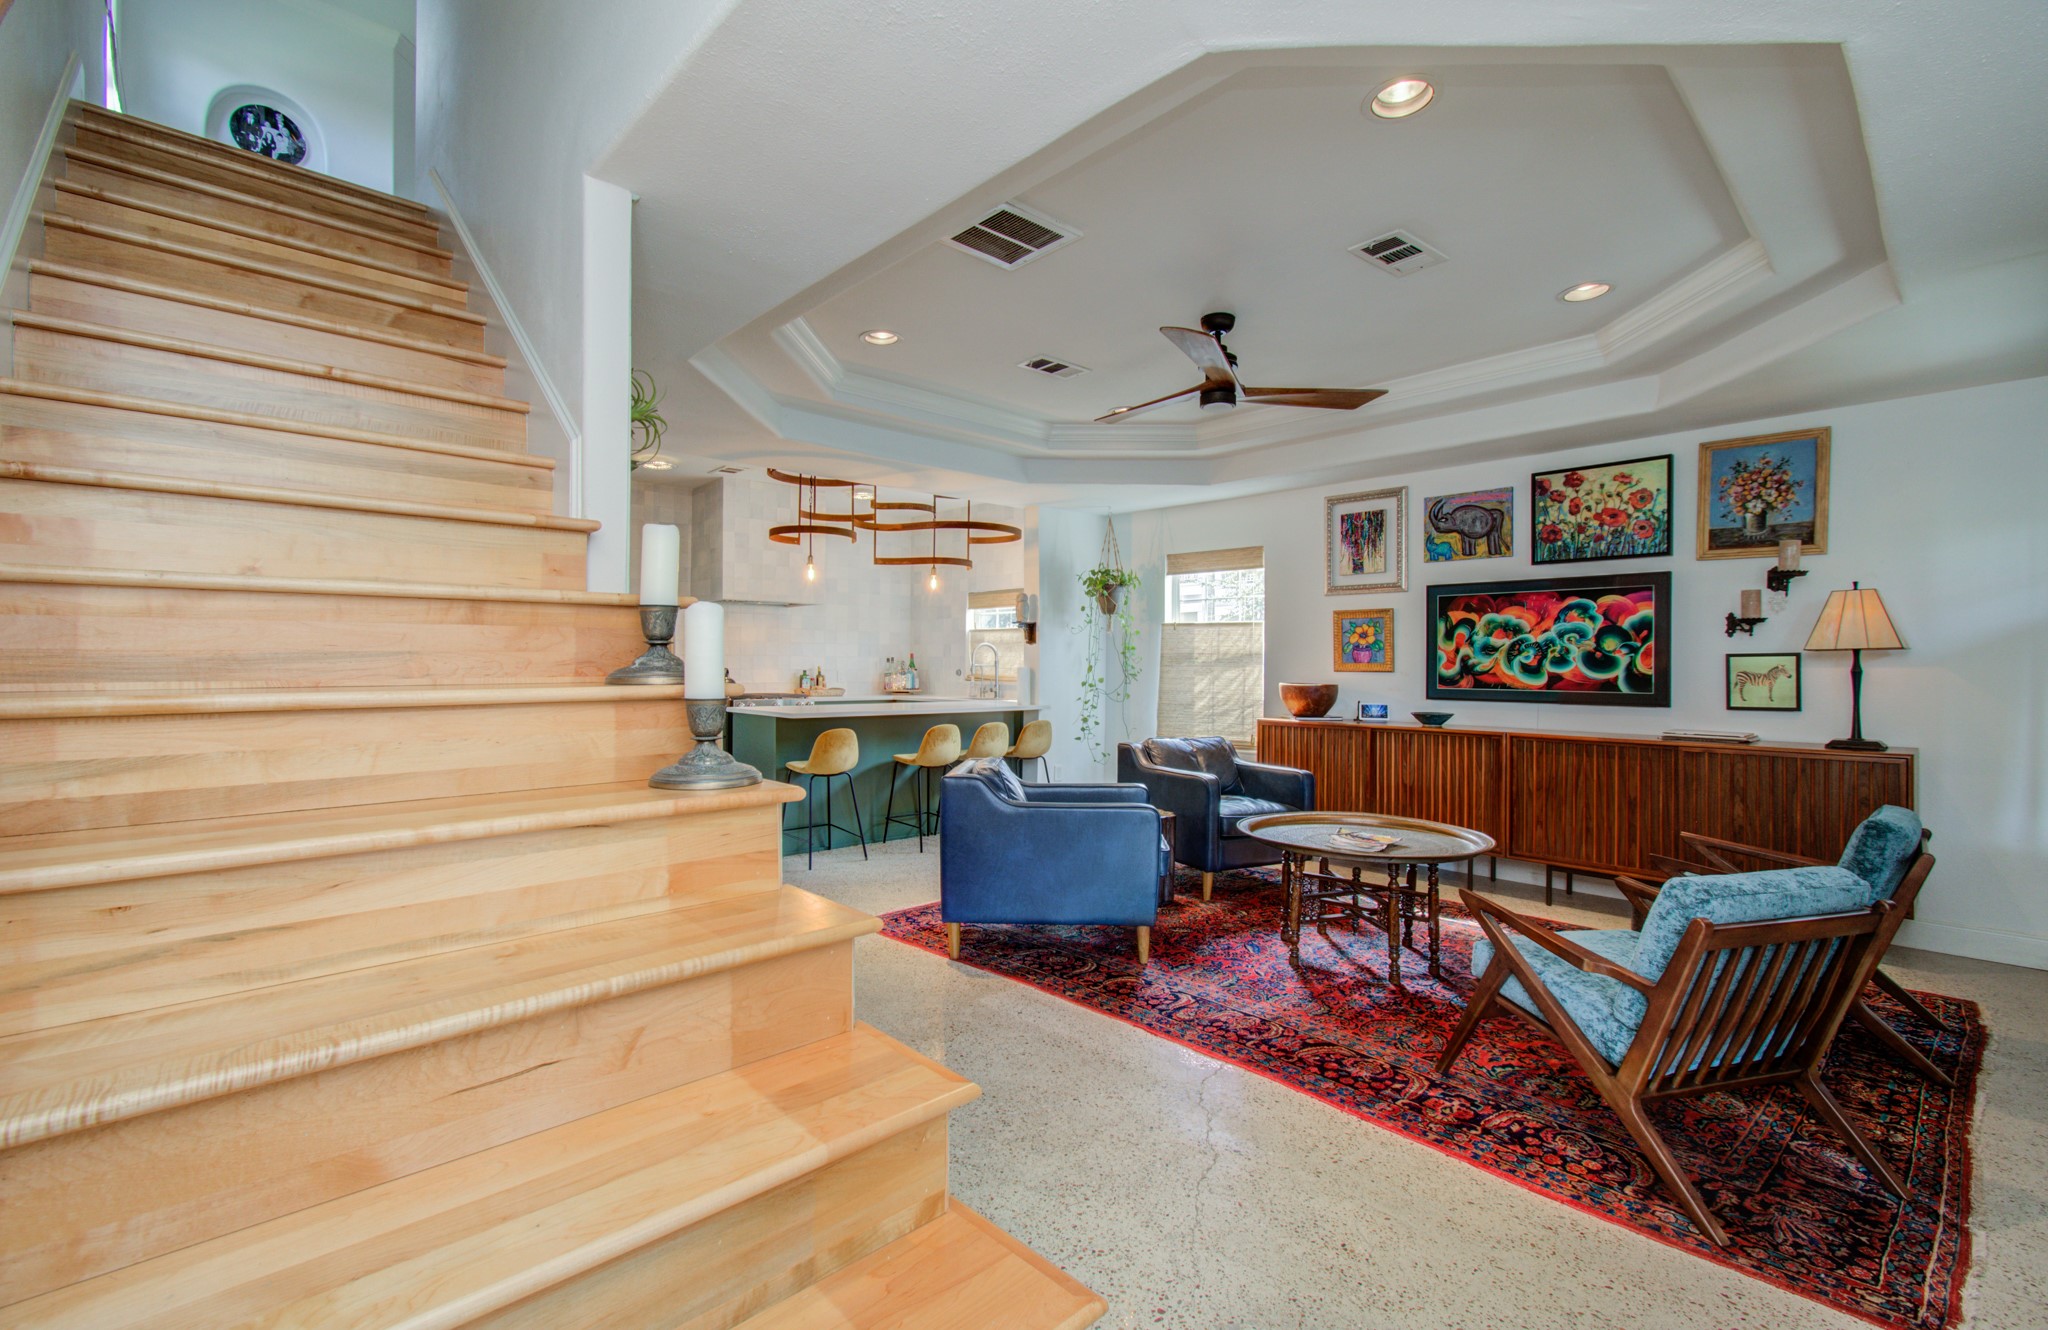 As you ascend the stairs, you are greeted by solid maple floors and stair treads, extending the warmth and elegance to the upper level of the home.